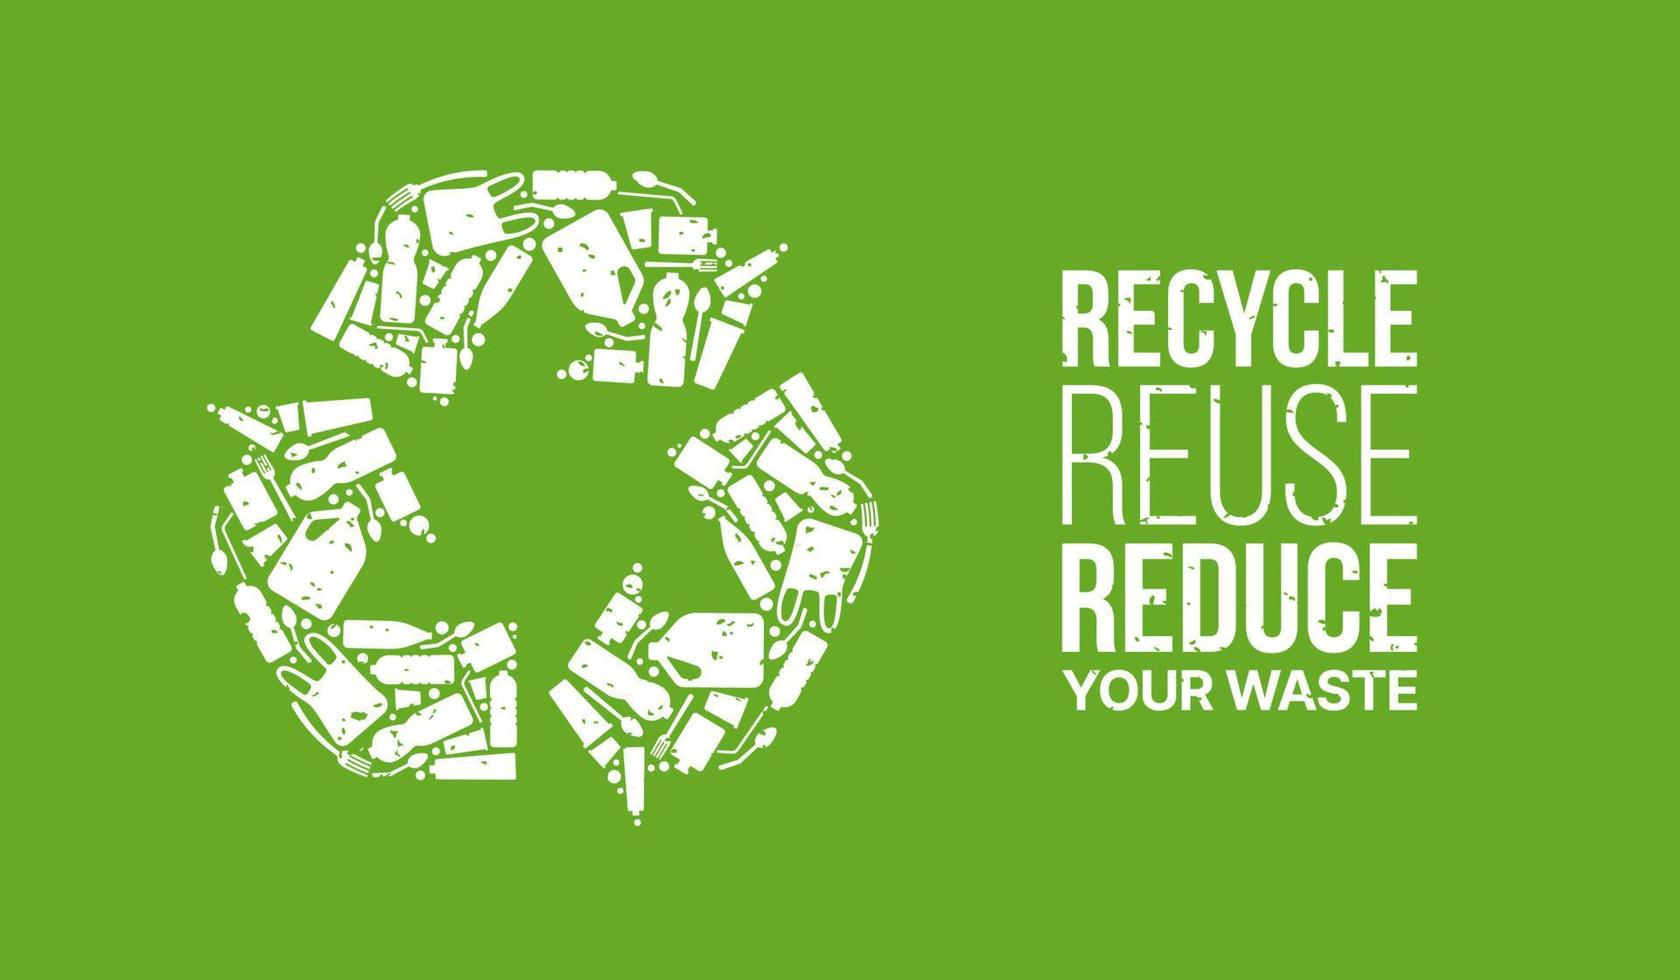 Recycle icon sign composed by plastic waste isolated on green background, Concept of recycle reuse reduce for ecological, zero waste and sustainability vector